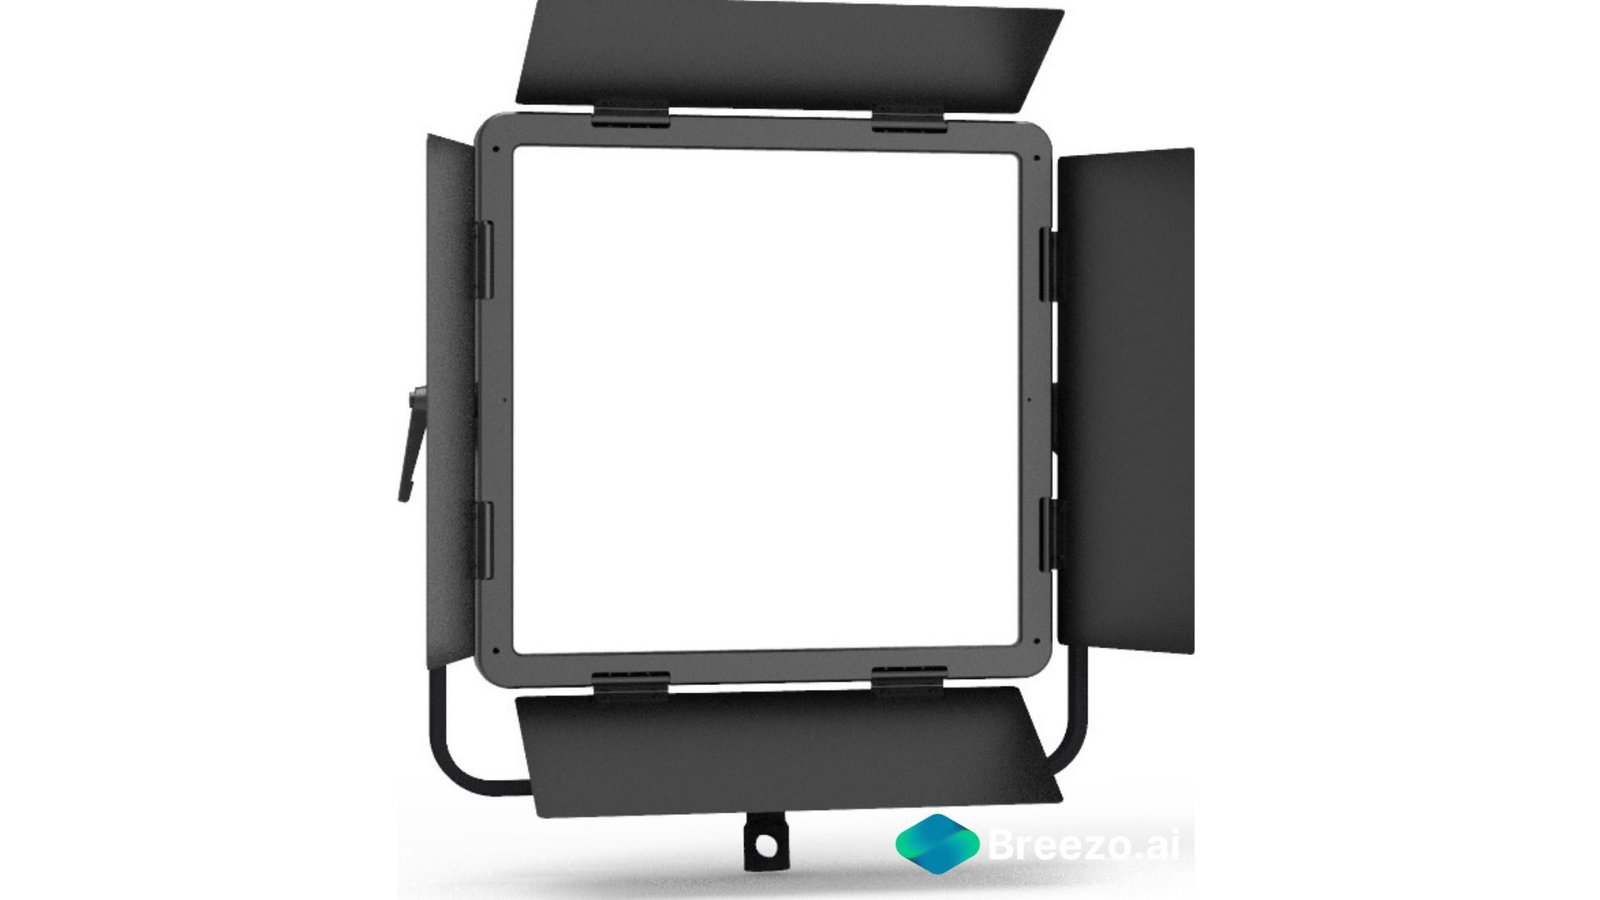 Rent 1x1 Feet Dimmable Bi-color LED Light in Delhi NCR, Camera accessories, in Delhi Gurgaon Noida, hire Shooting equipment, Lighting equipment rental, Film gear rental for Video production, camera rental company in Delhi, film equipment rental company